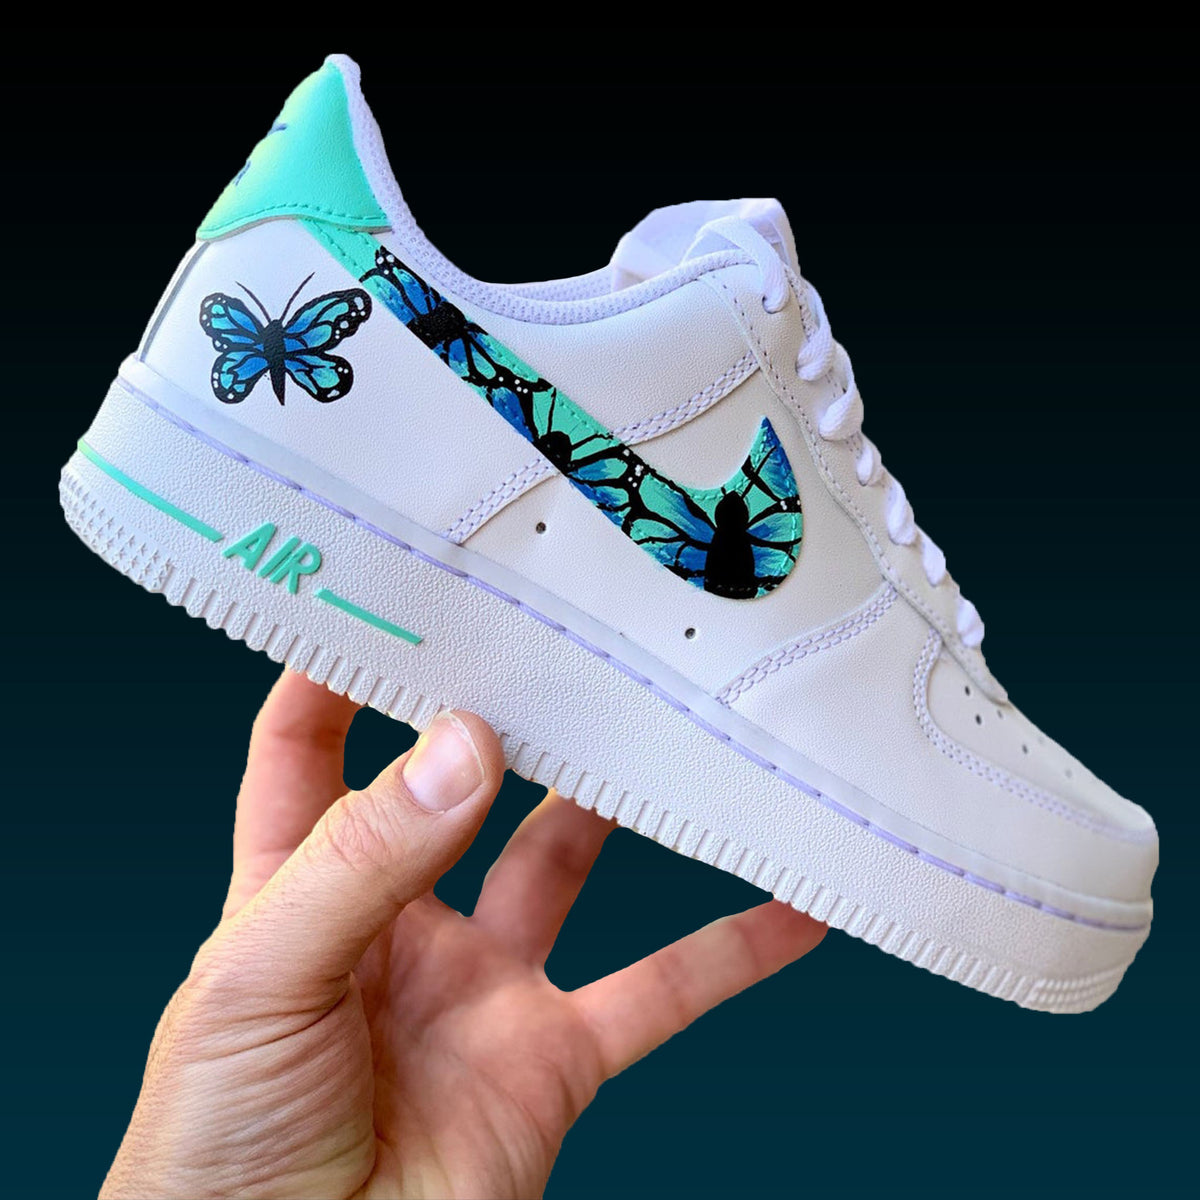 Nike CUSTOM Painted And Reflective Butterfly Air Force Ones